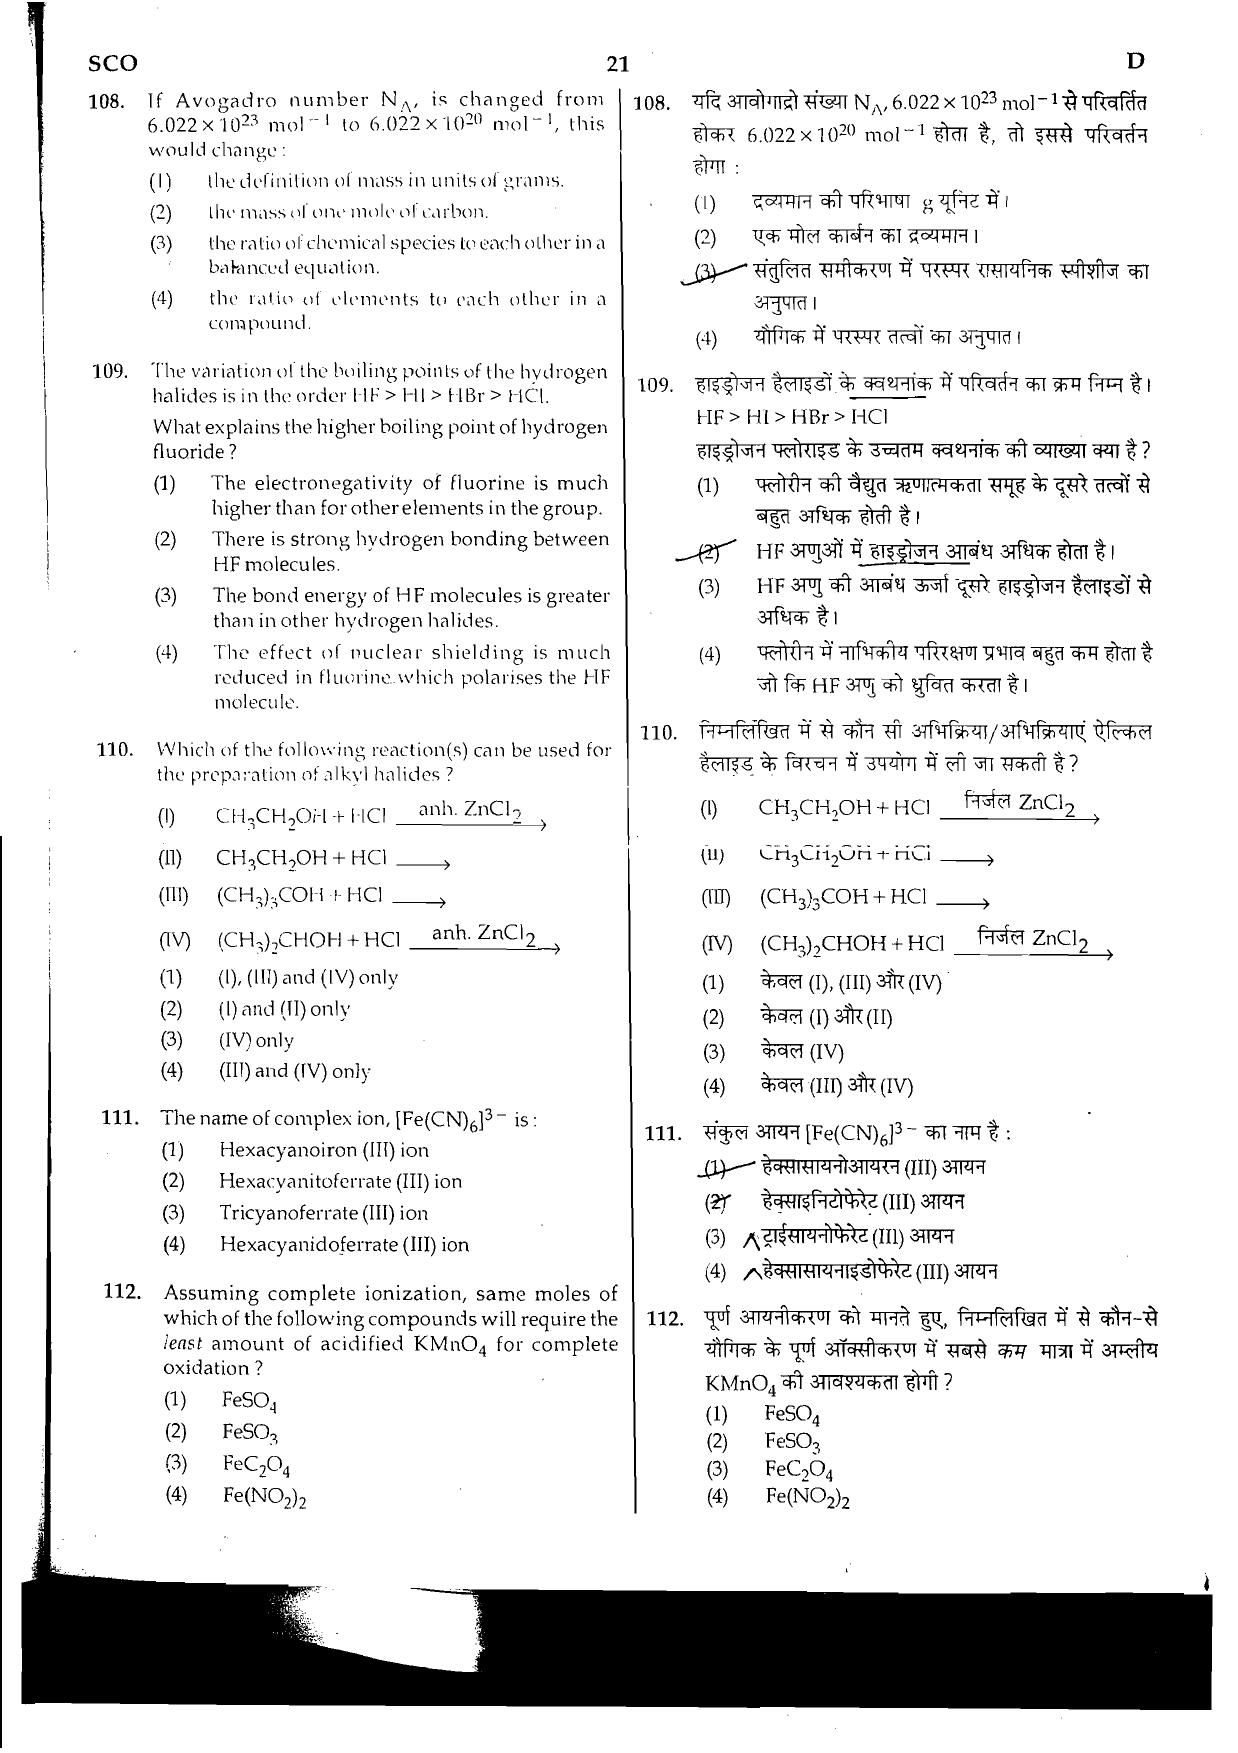 NEET Code D 2015 Question Paper - Page 21